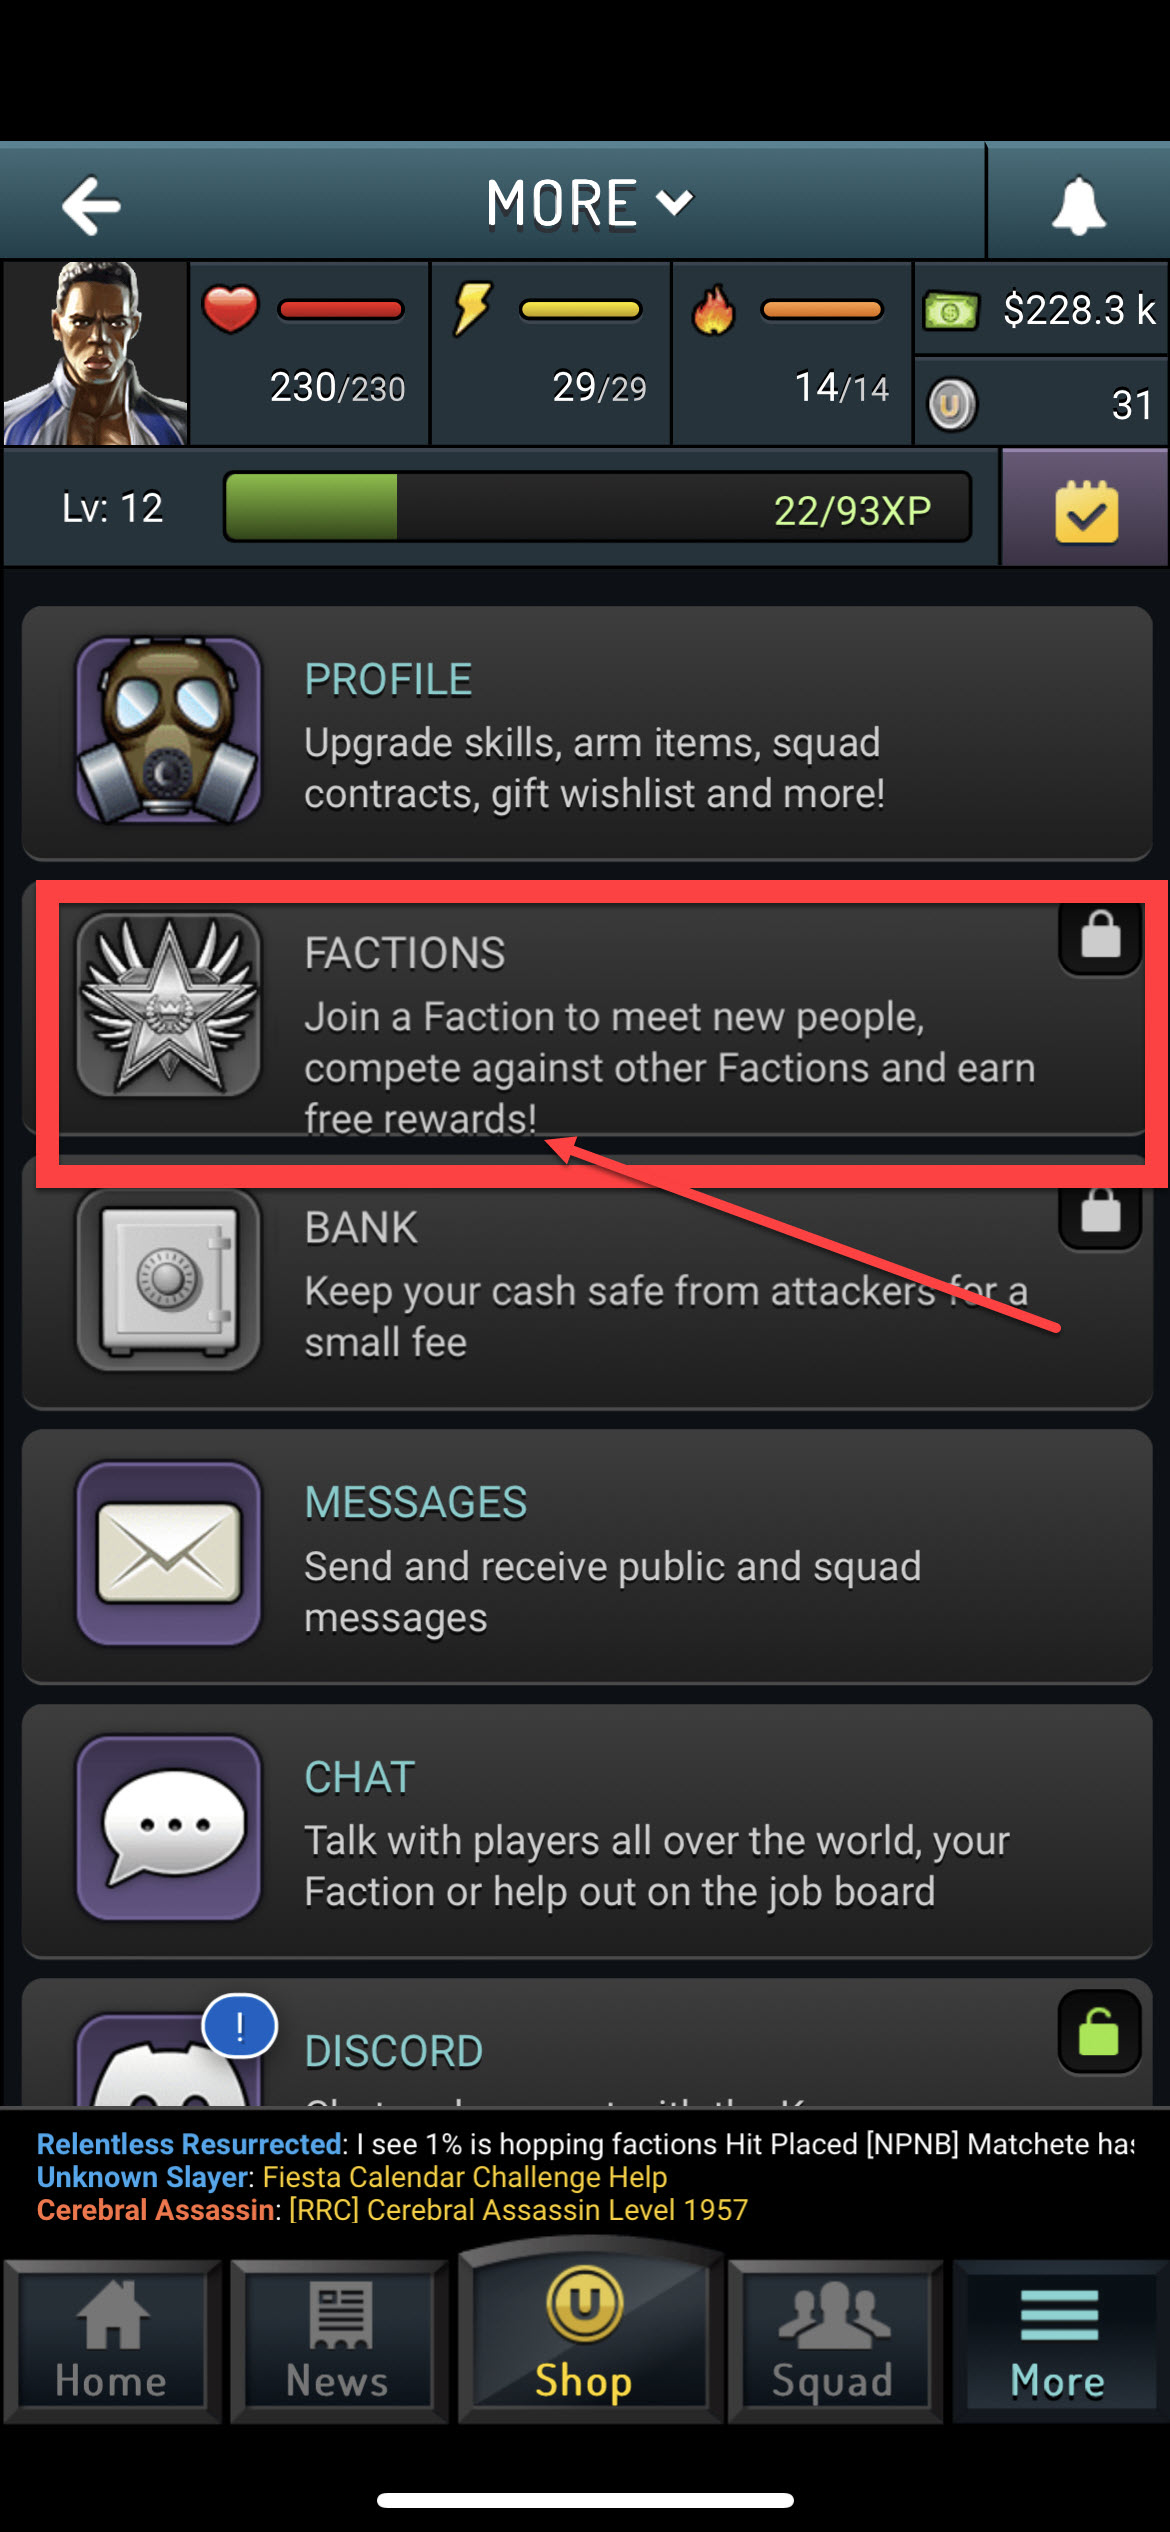 Text misalignment in “Factions” section on “More” screen